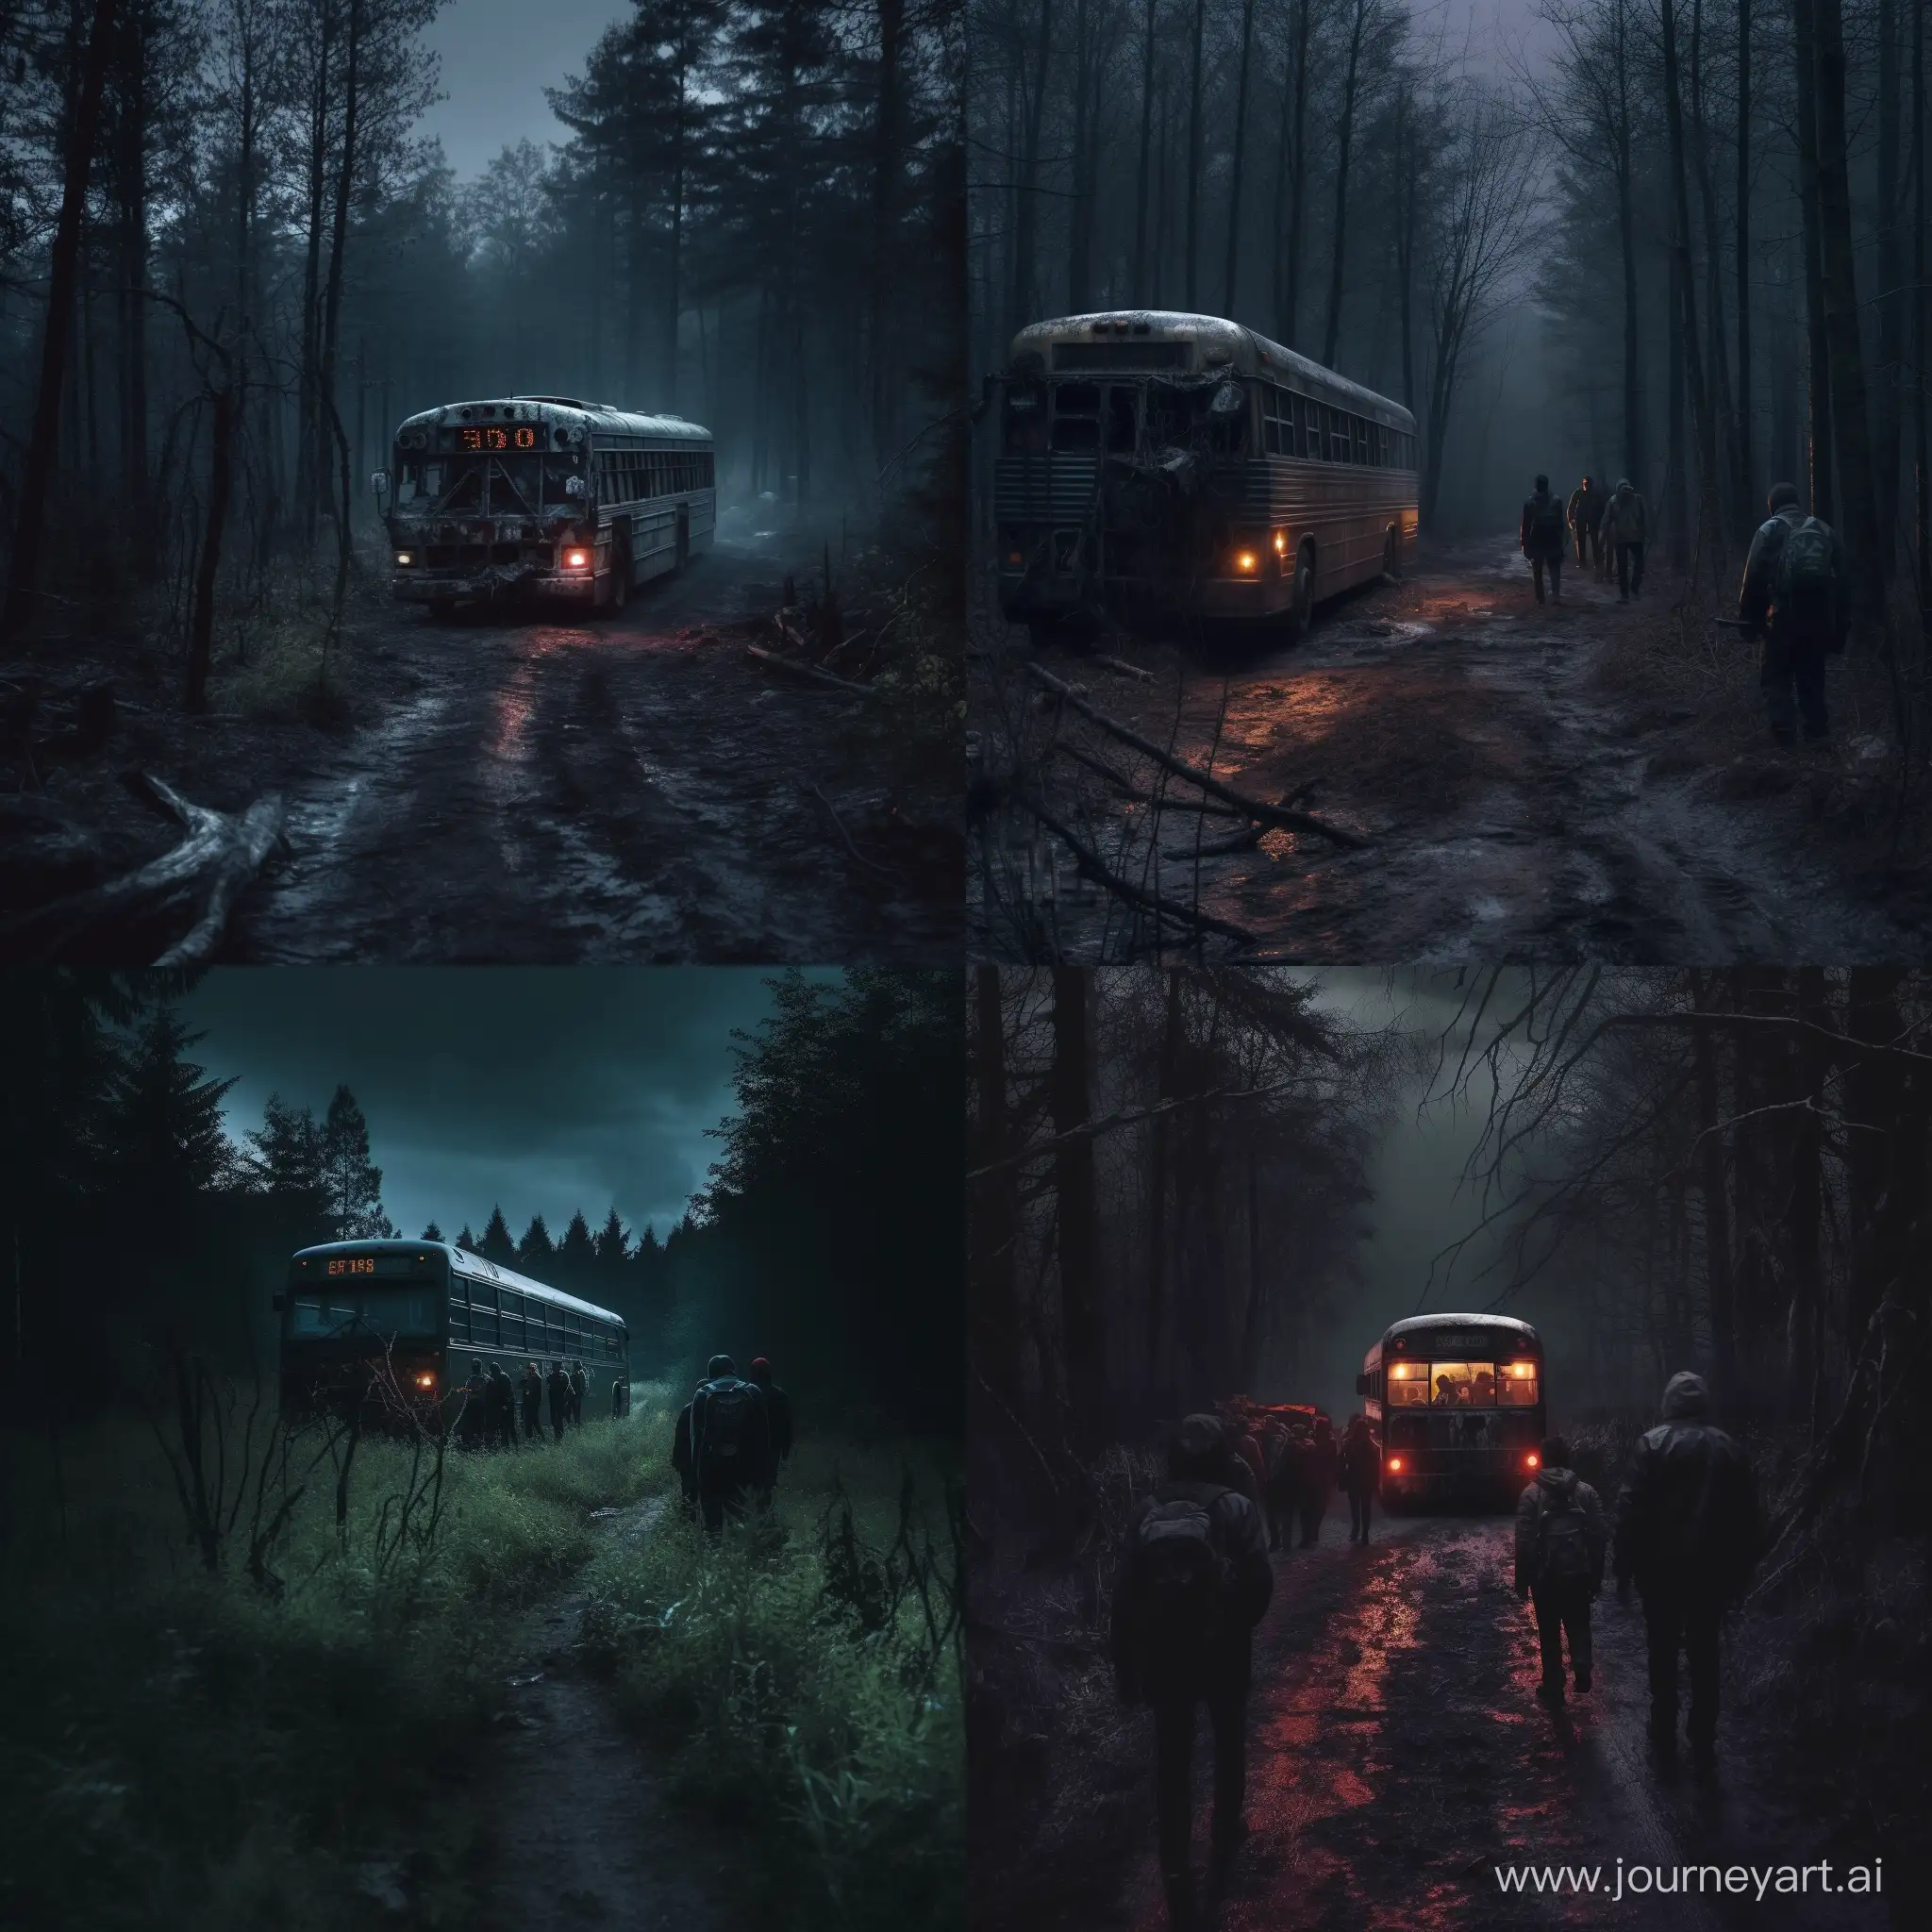 Russian-Abandoned-Bus-in-Gloomy-Forest-with-Tourists